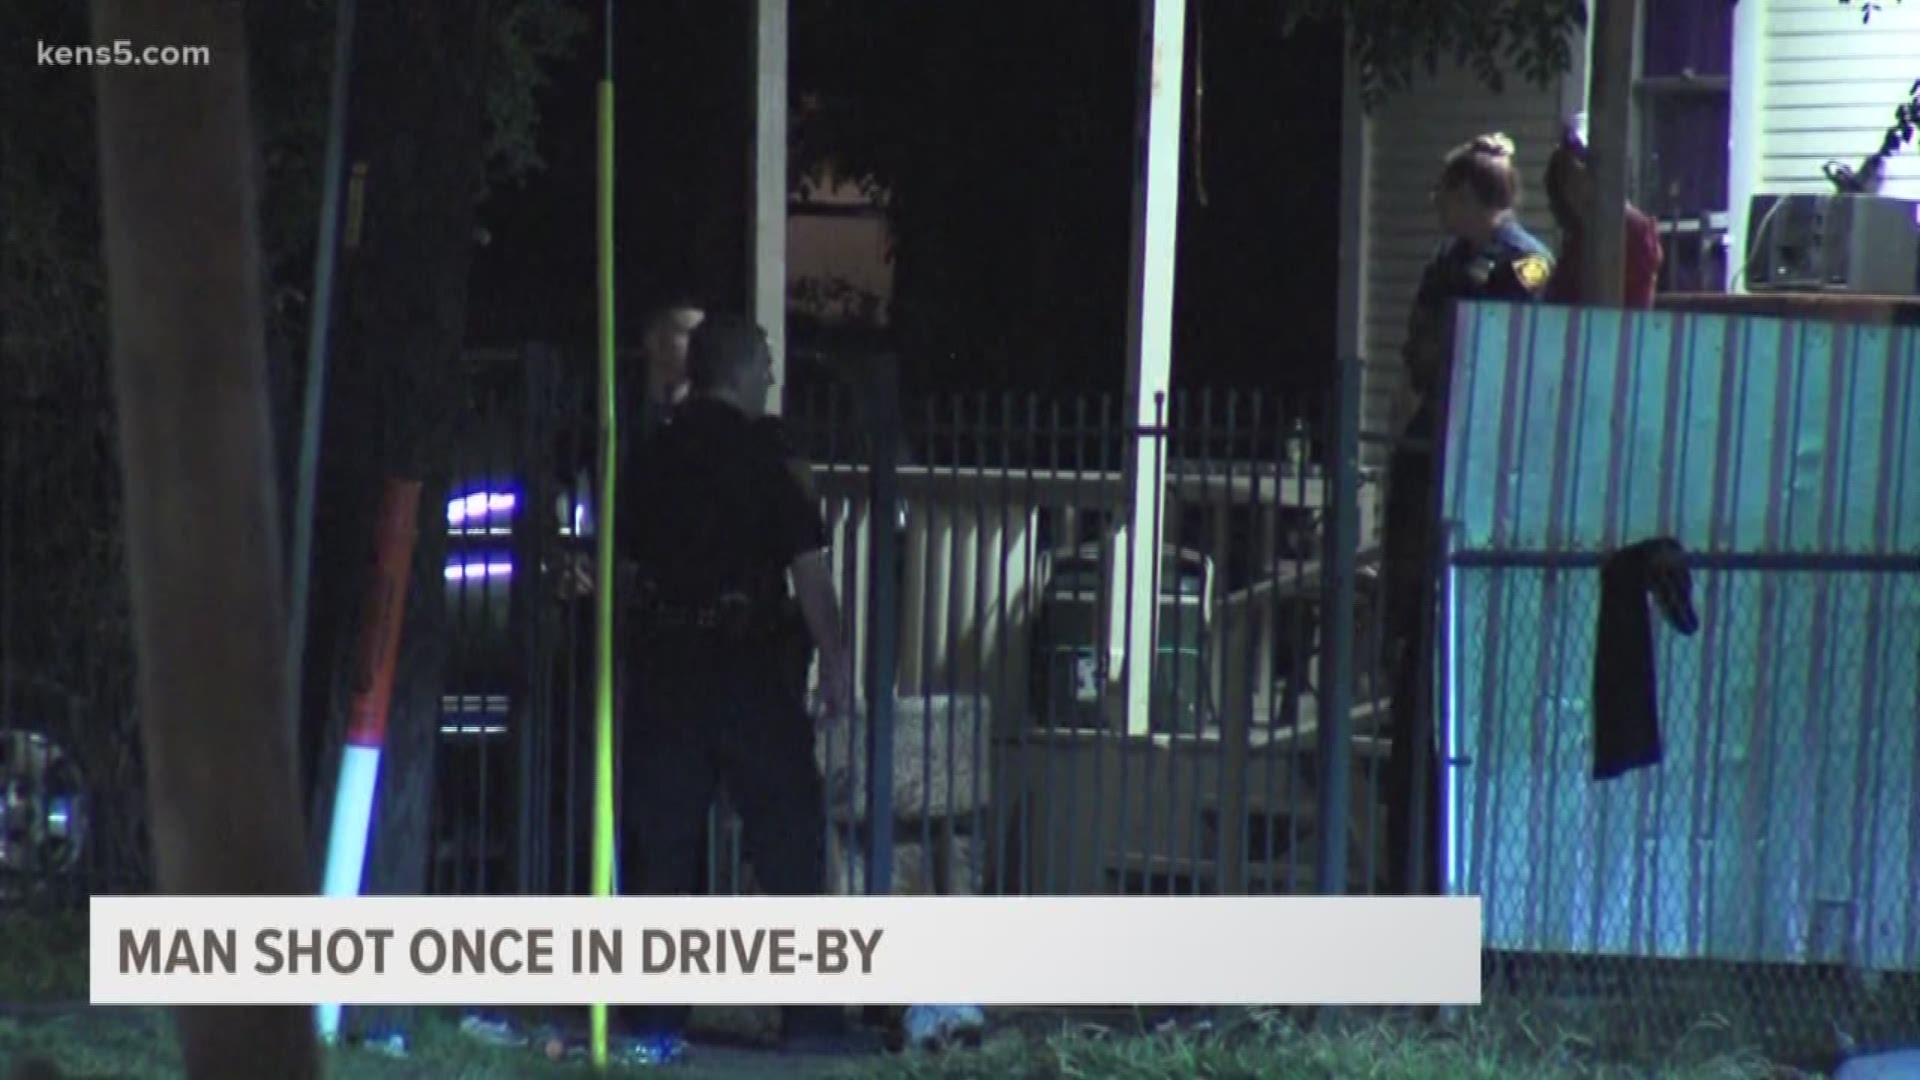 Police said the man was playing dice with friends when he was shot in a drive-by.